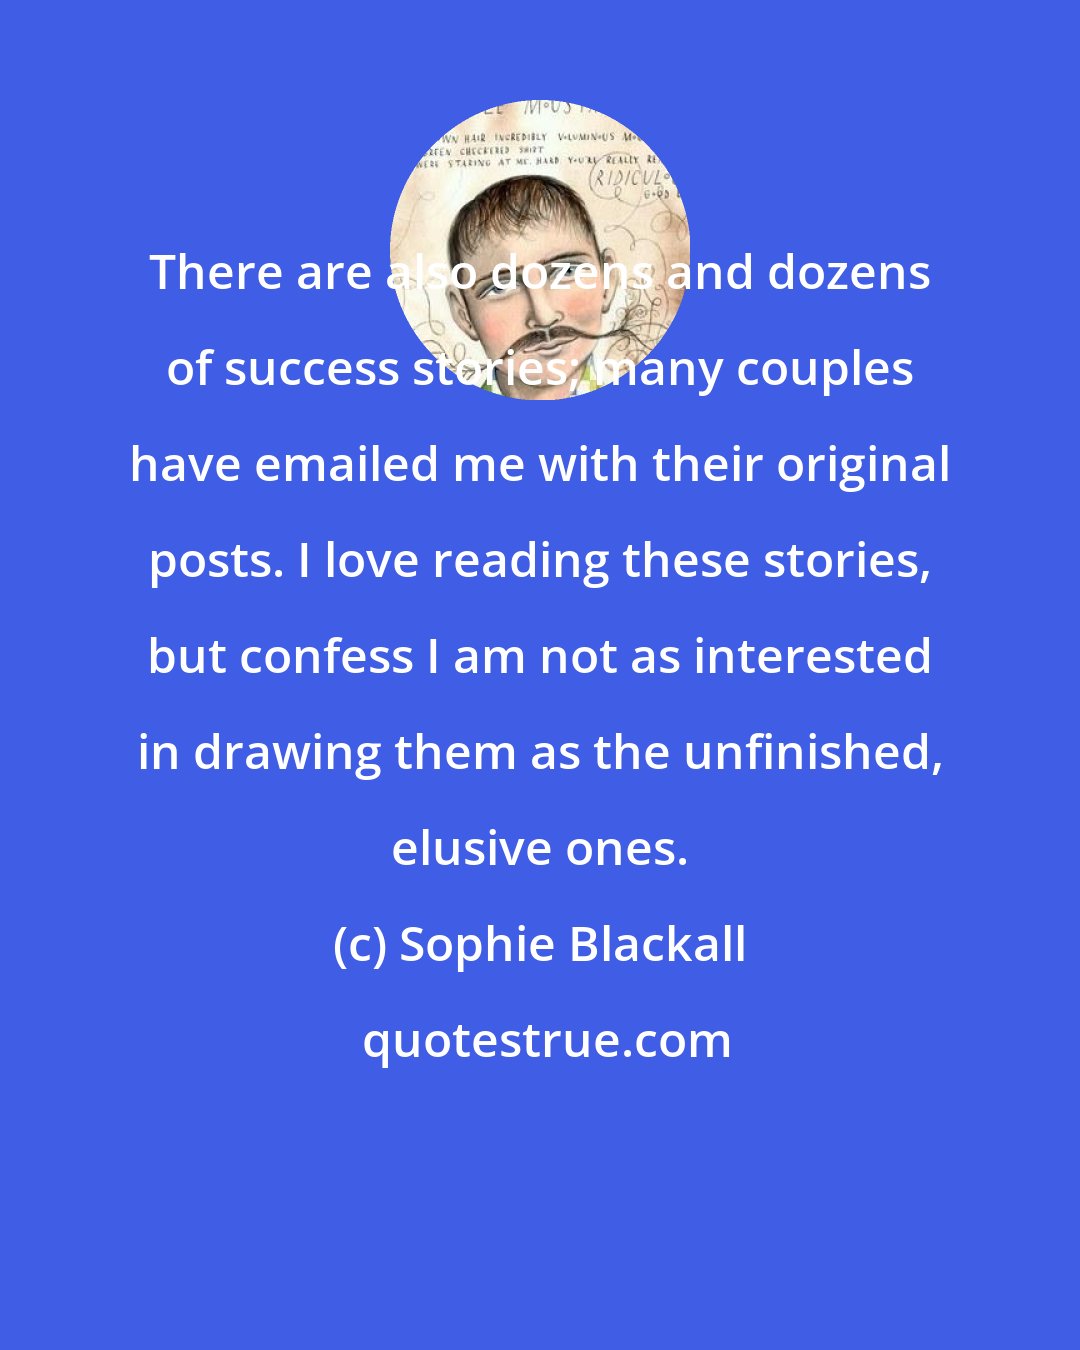 Sophie Blackall: There are also dozens and dozens of success stories; many couples have emailed me with their original posts. I love reading these stories, but confess I am not as interested in drawing them as the unfinished, elusive ones.